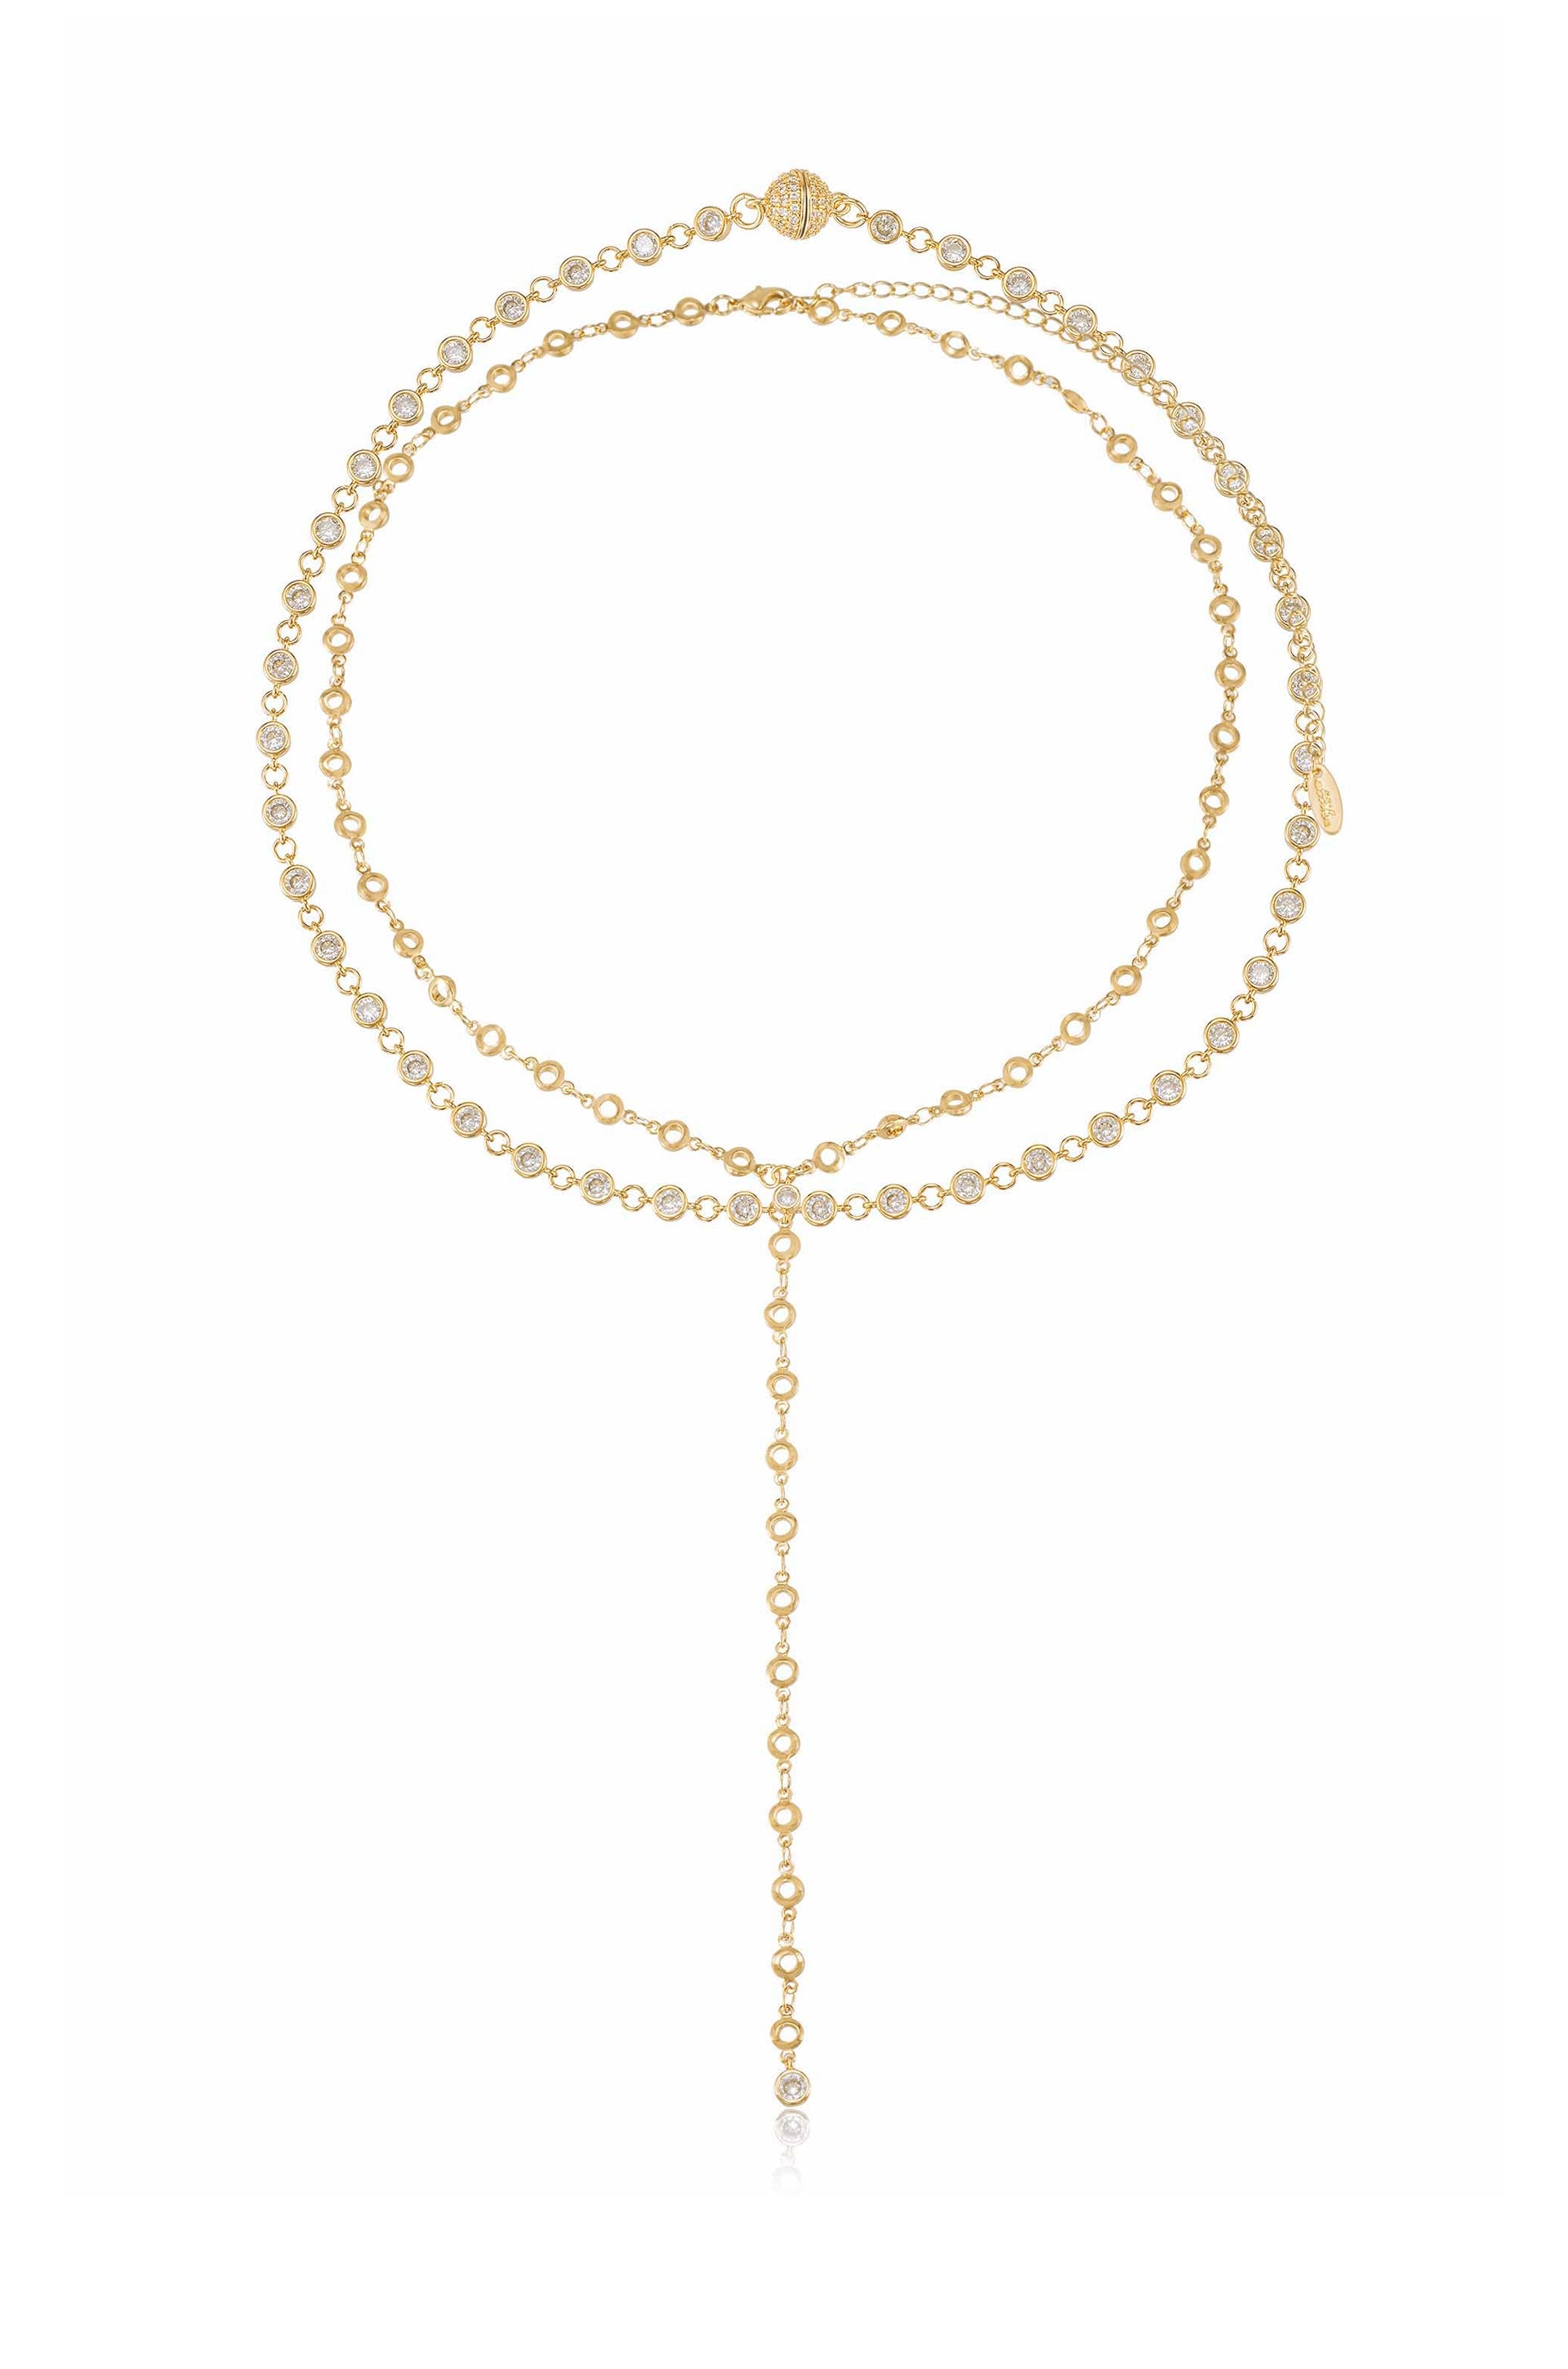 Crystal and 18k Gold Plated Chain Lariat Necklace Set full